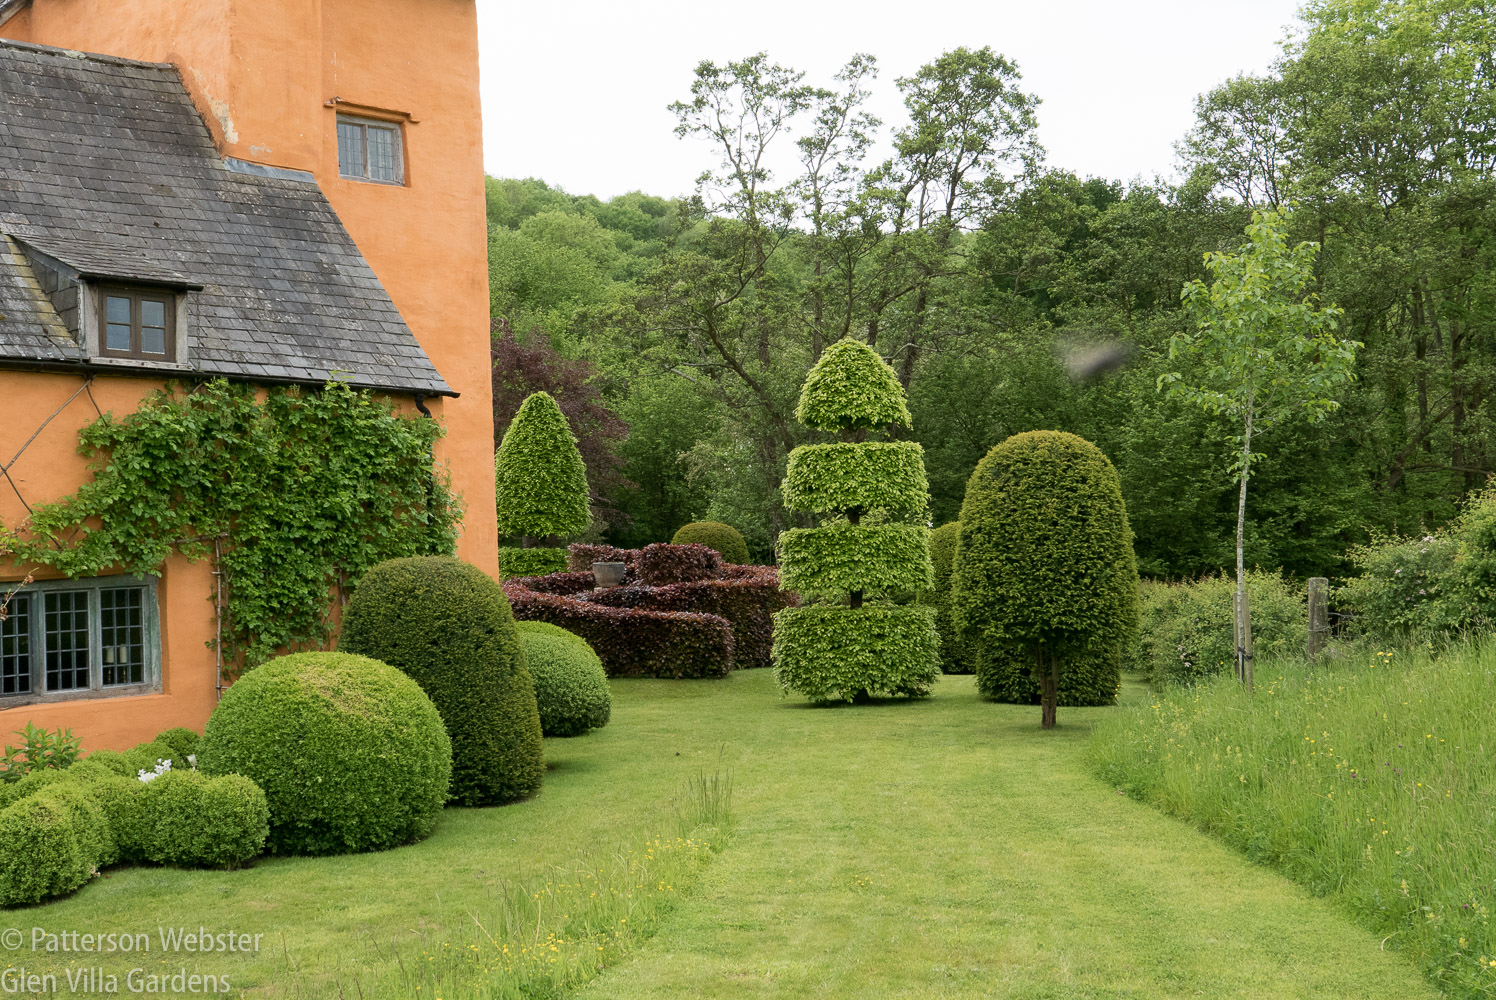 Topiary at Allt-y-bela was stunning.